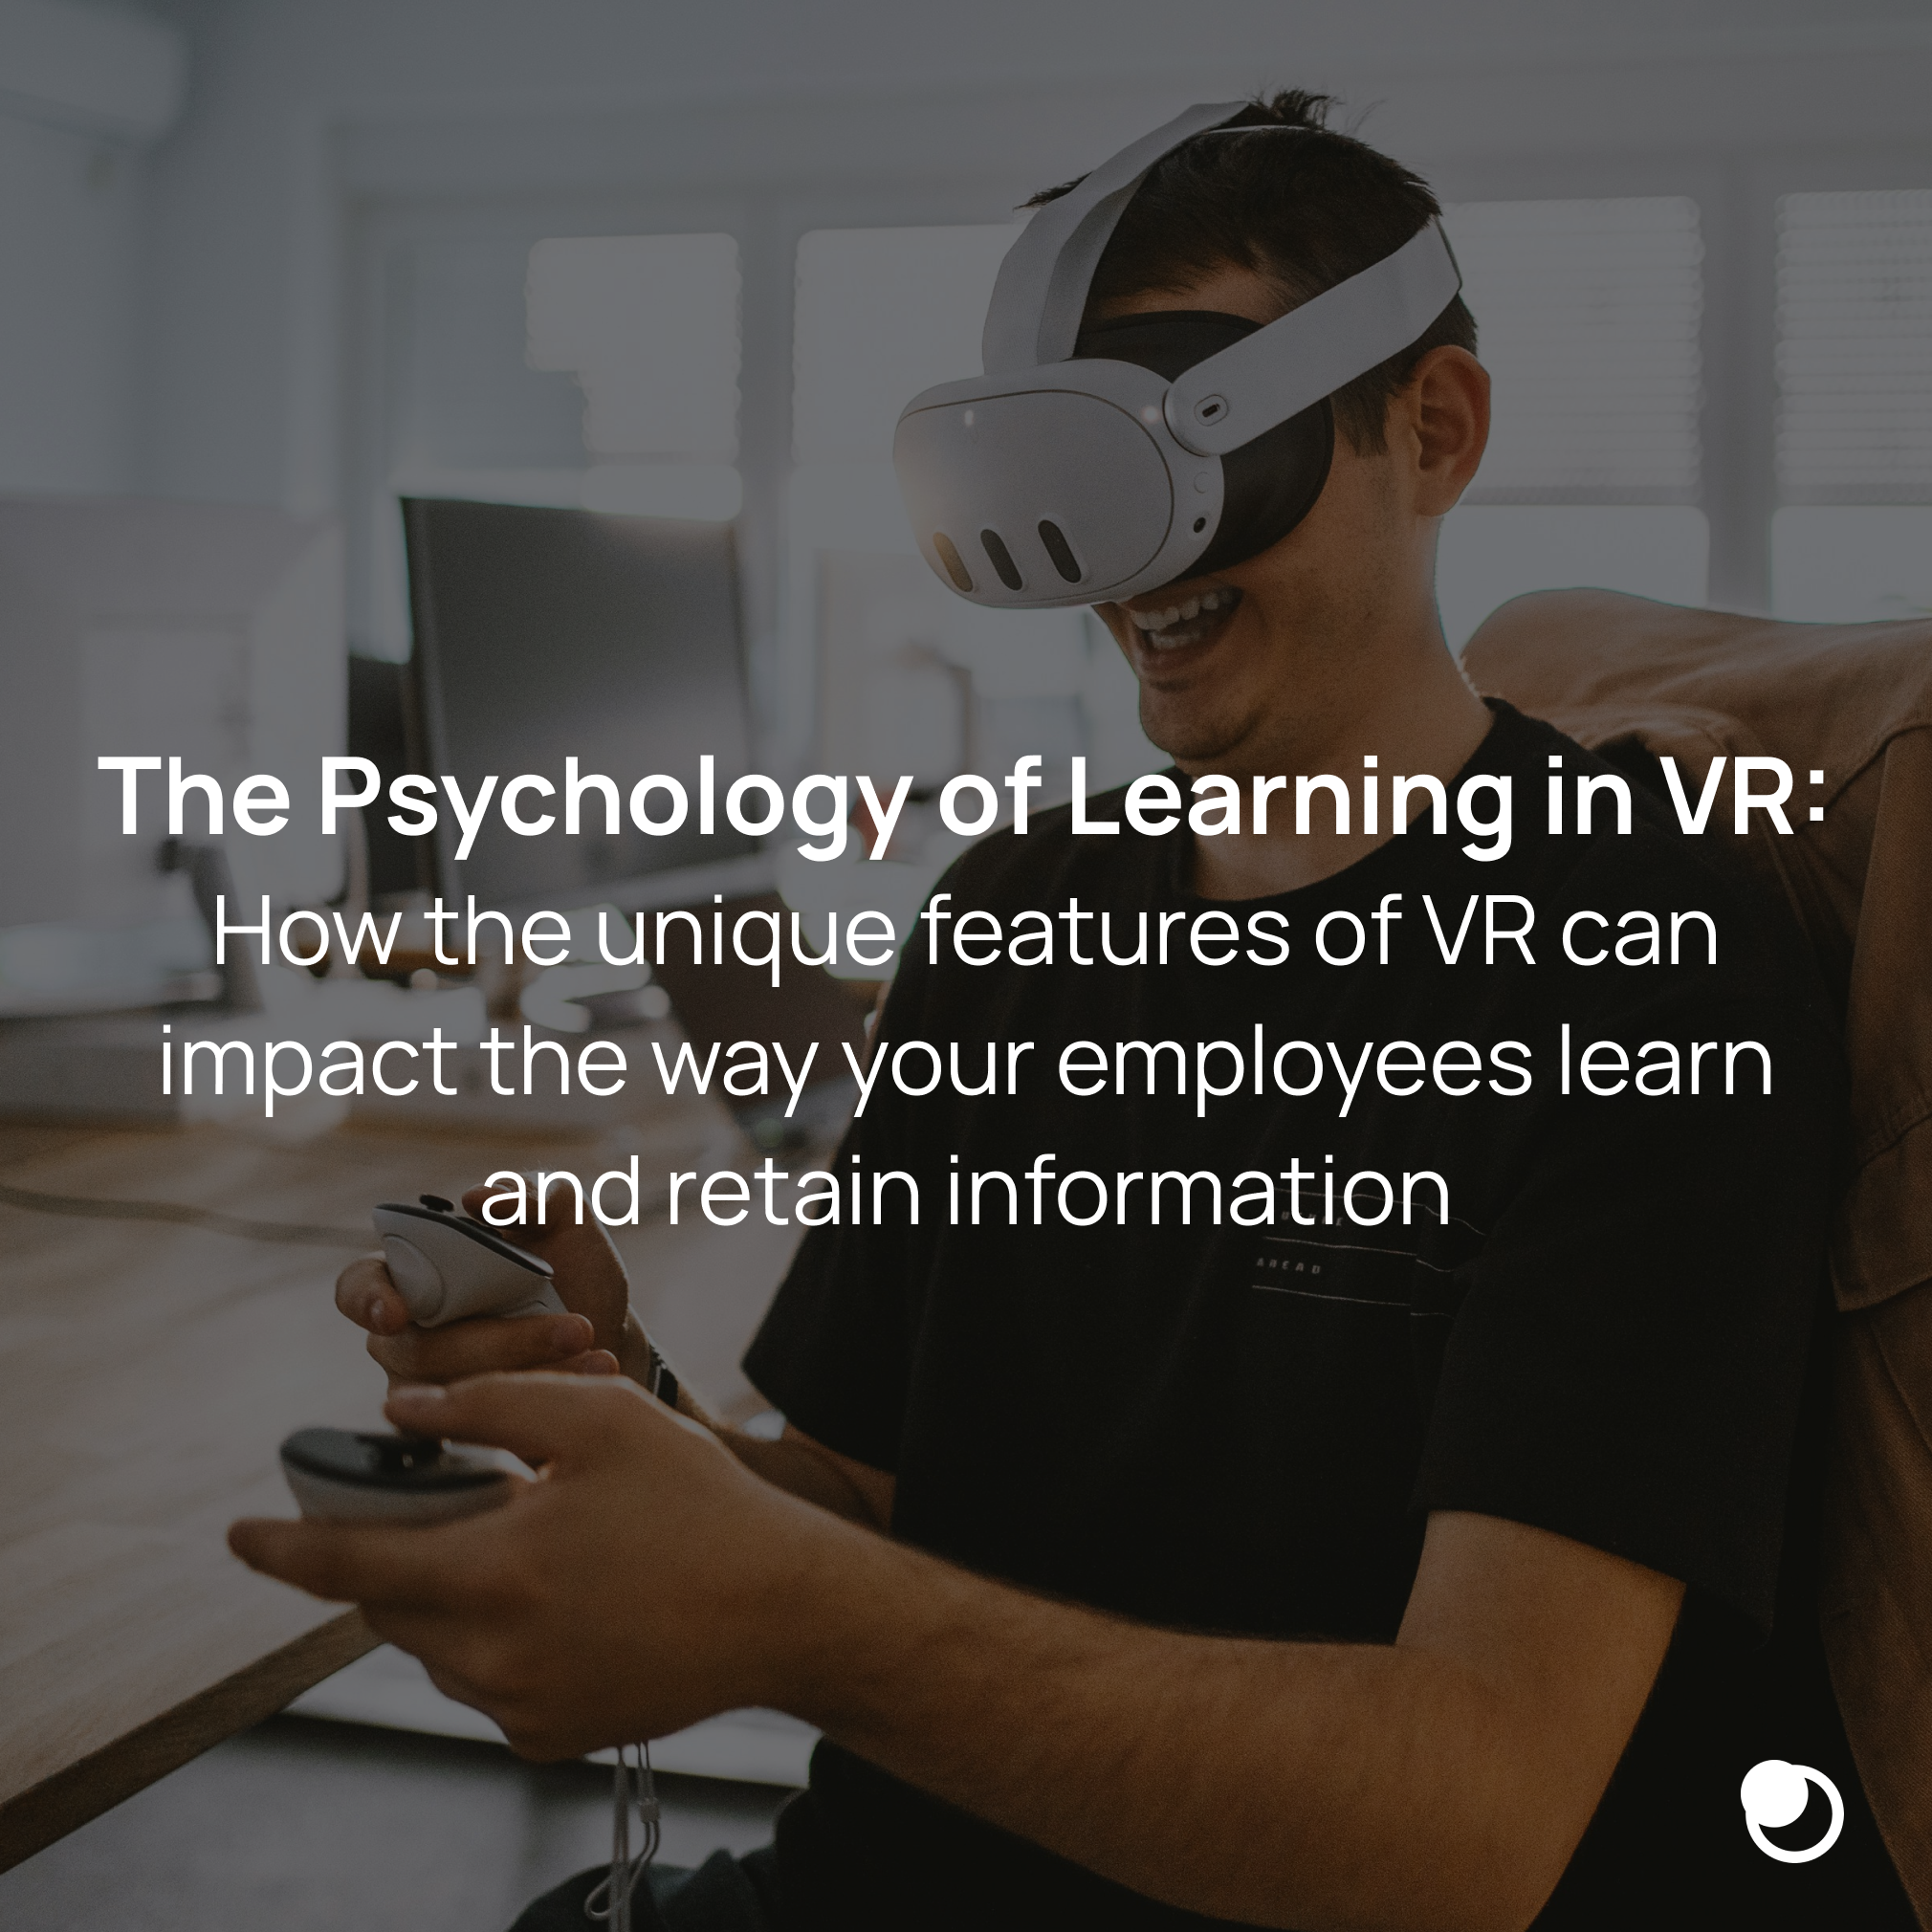 The Psychology of Learning in VR